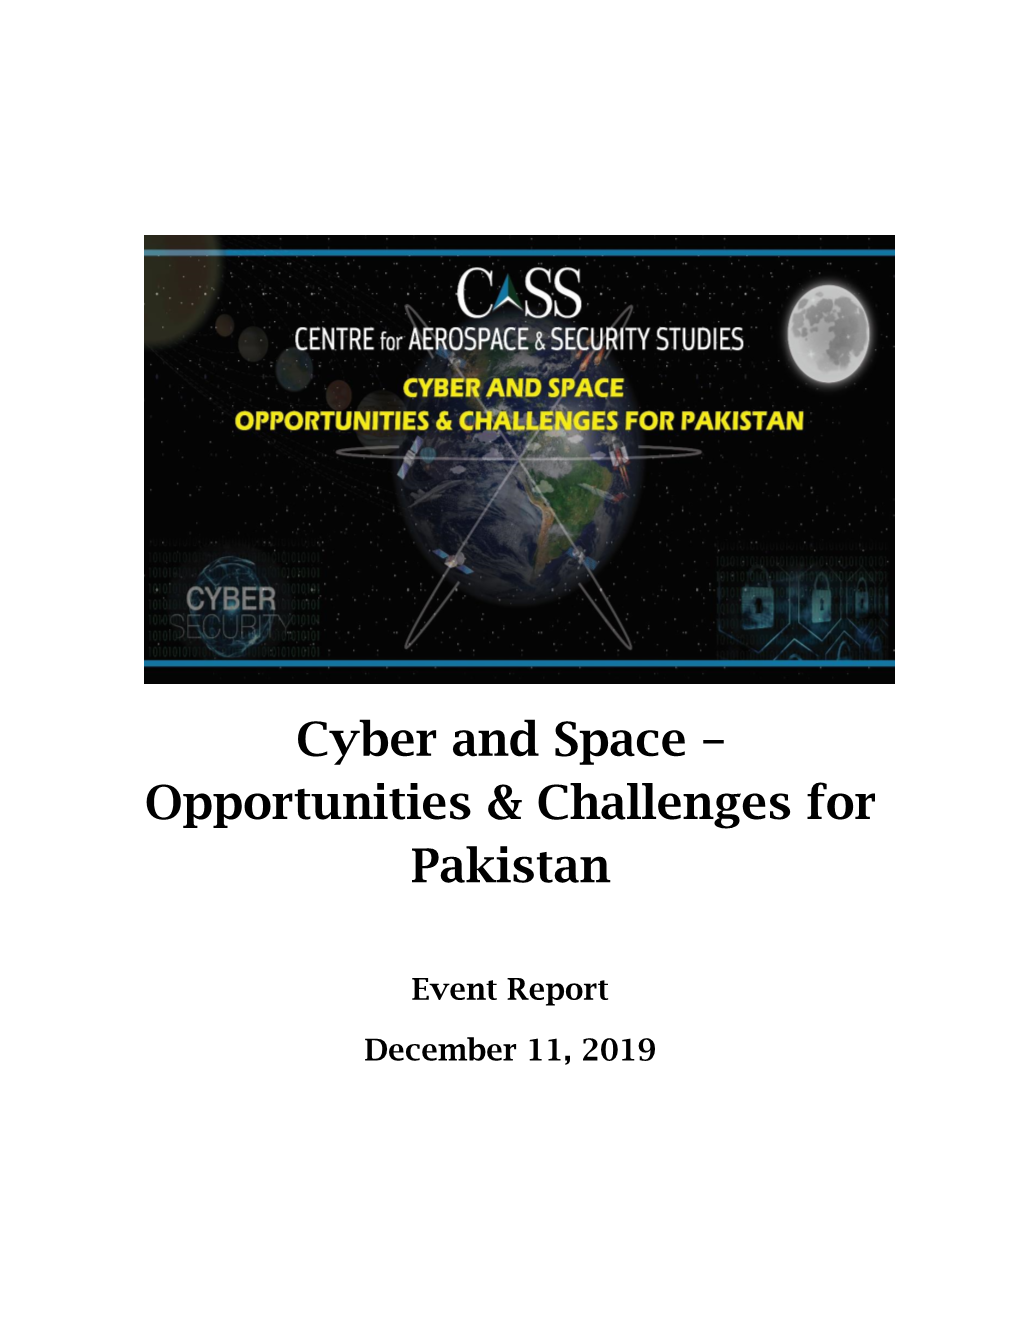 Cyber and Space – Opportunities & Challenges for Pakistan